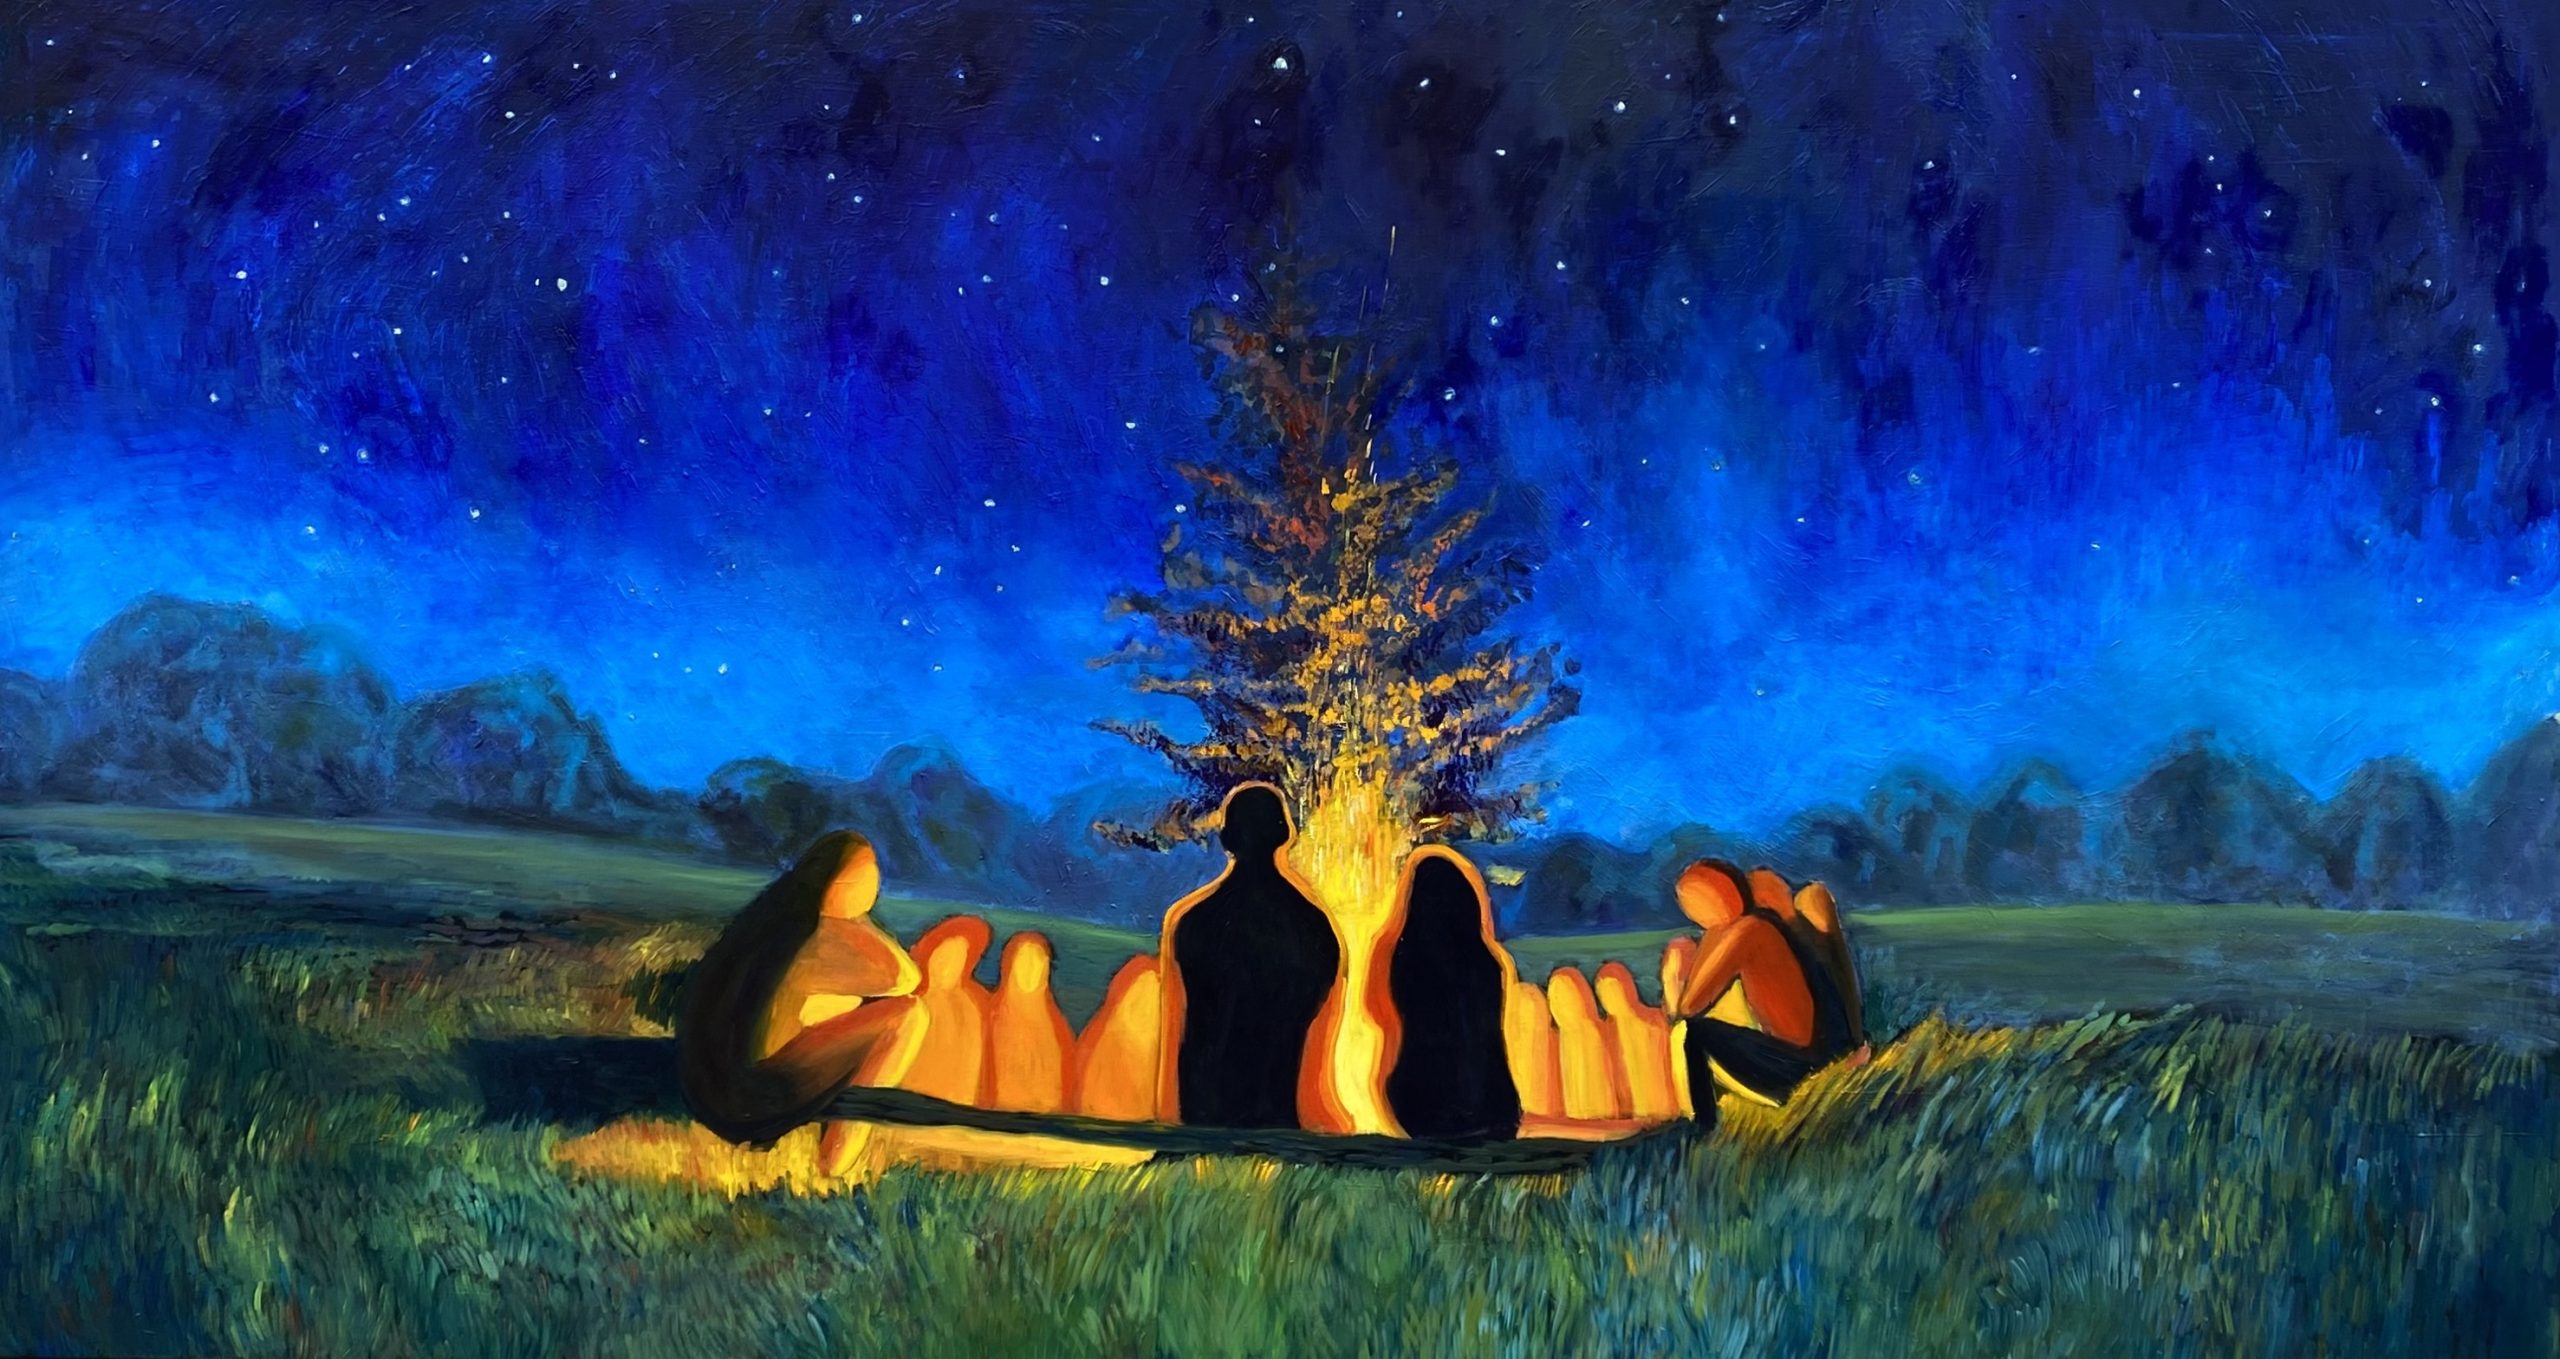 Group of friends enjoying a serene night around a glowing campfire under a starry sky, depicted in iDolly’s vibrant acrylic painting ‘Campfire’ on a large canvas.